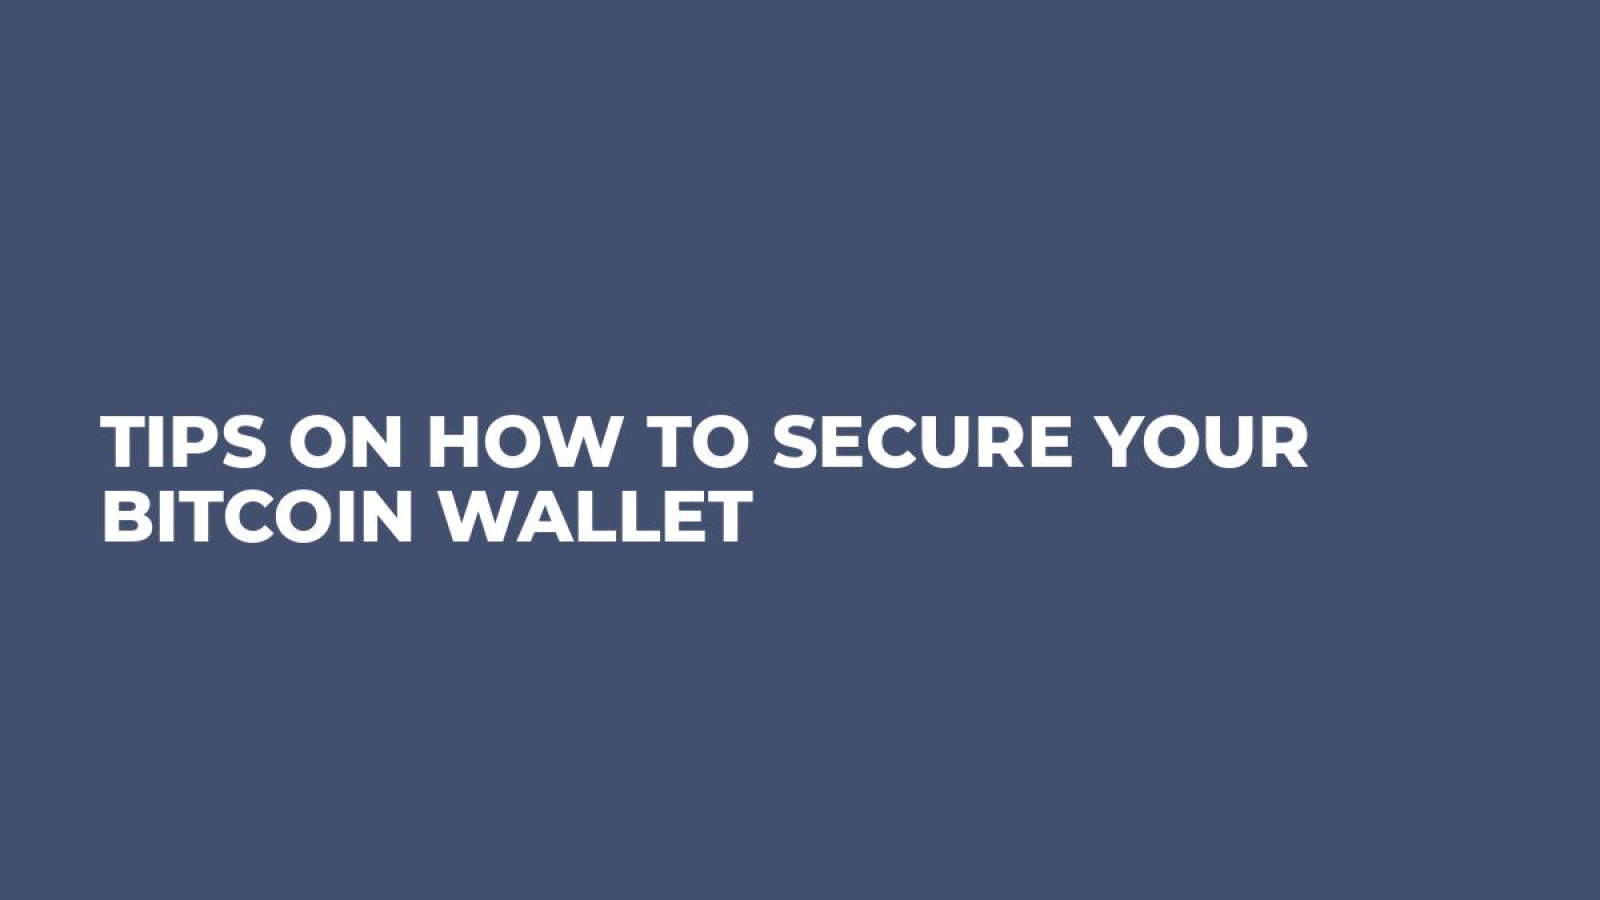 Tips on how to secure your bitcoin wallet